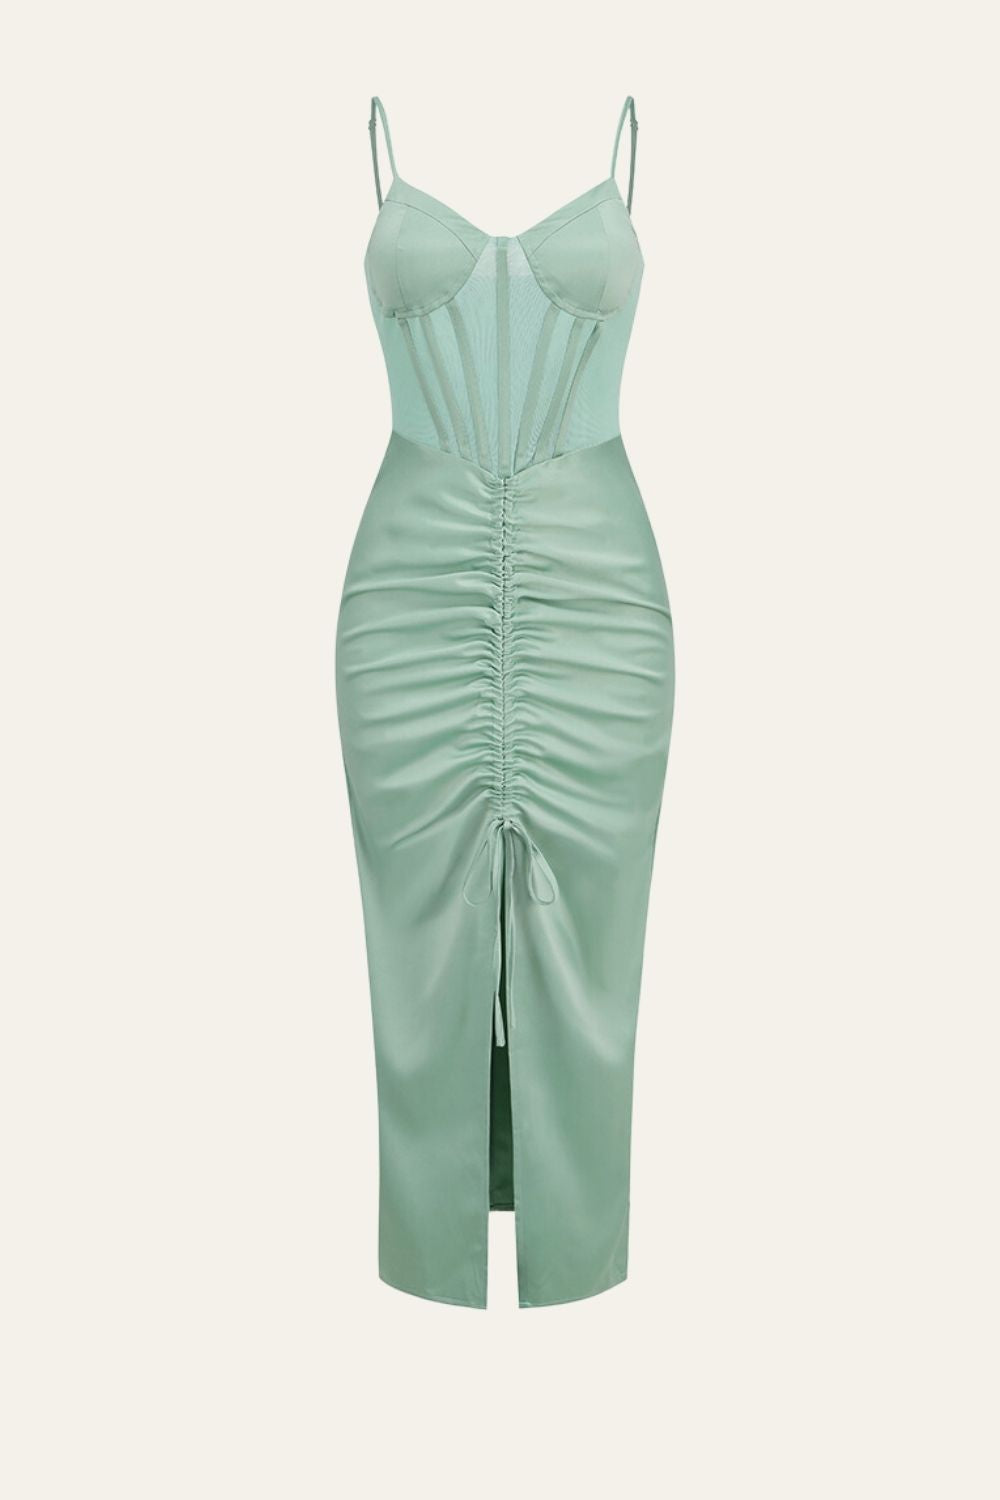 Green Spaghetti Straps Drawstring Pleated Corset Cocktail Party Dress with Slit